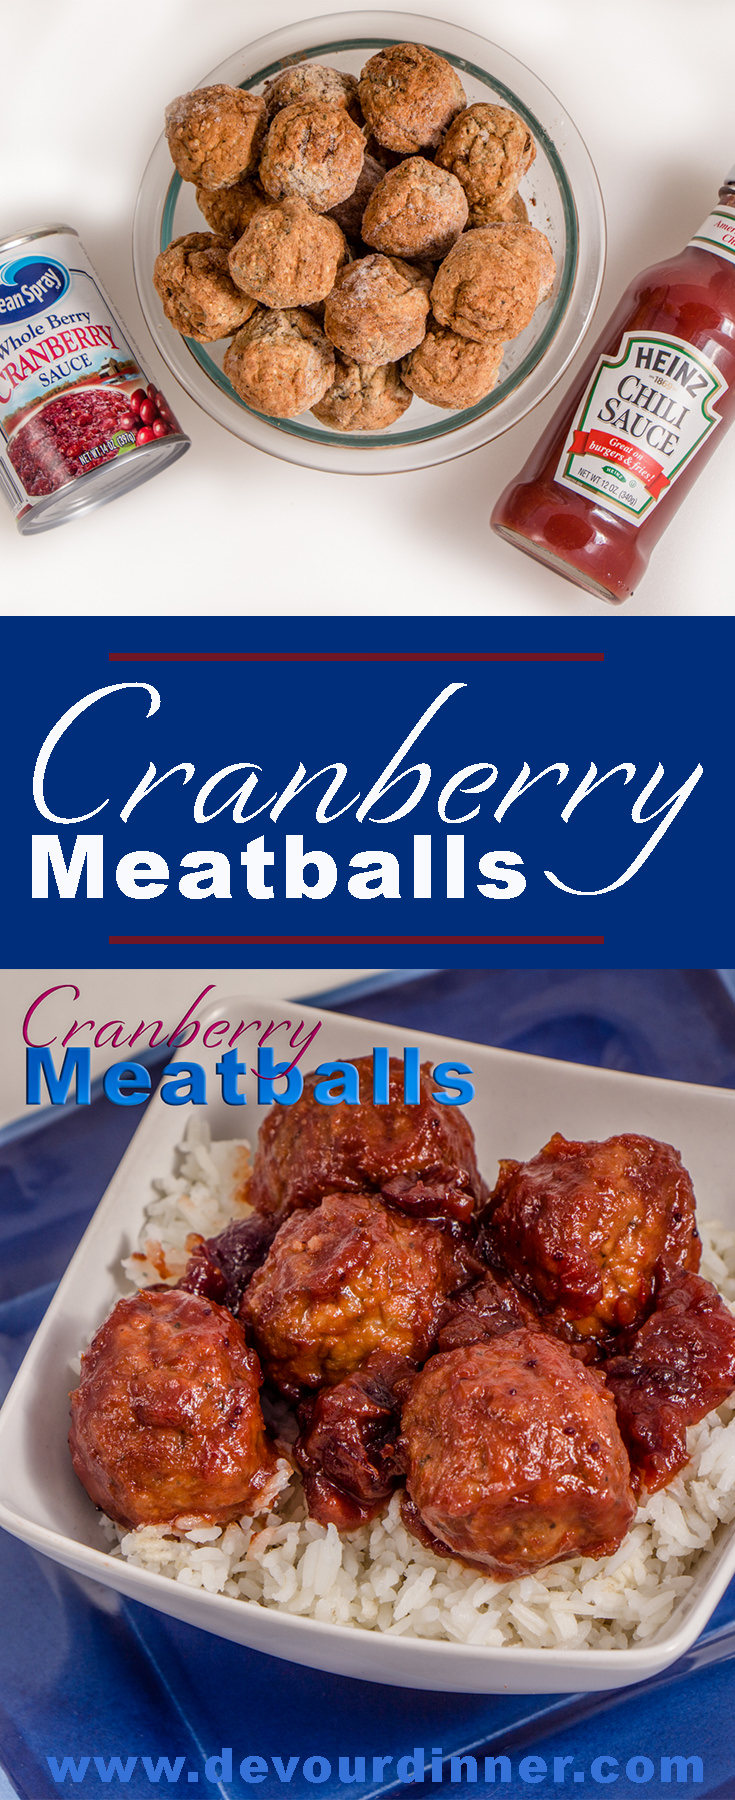 Cranberry Meatballs - Devour Dinner. Easy 3 ingredients perfect for #appetizer or even main course. Serve with Rice. #recipe #recipes #food #foodie #foodblogger #buzzfeast #Devourdinner